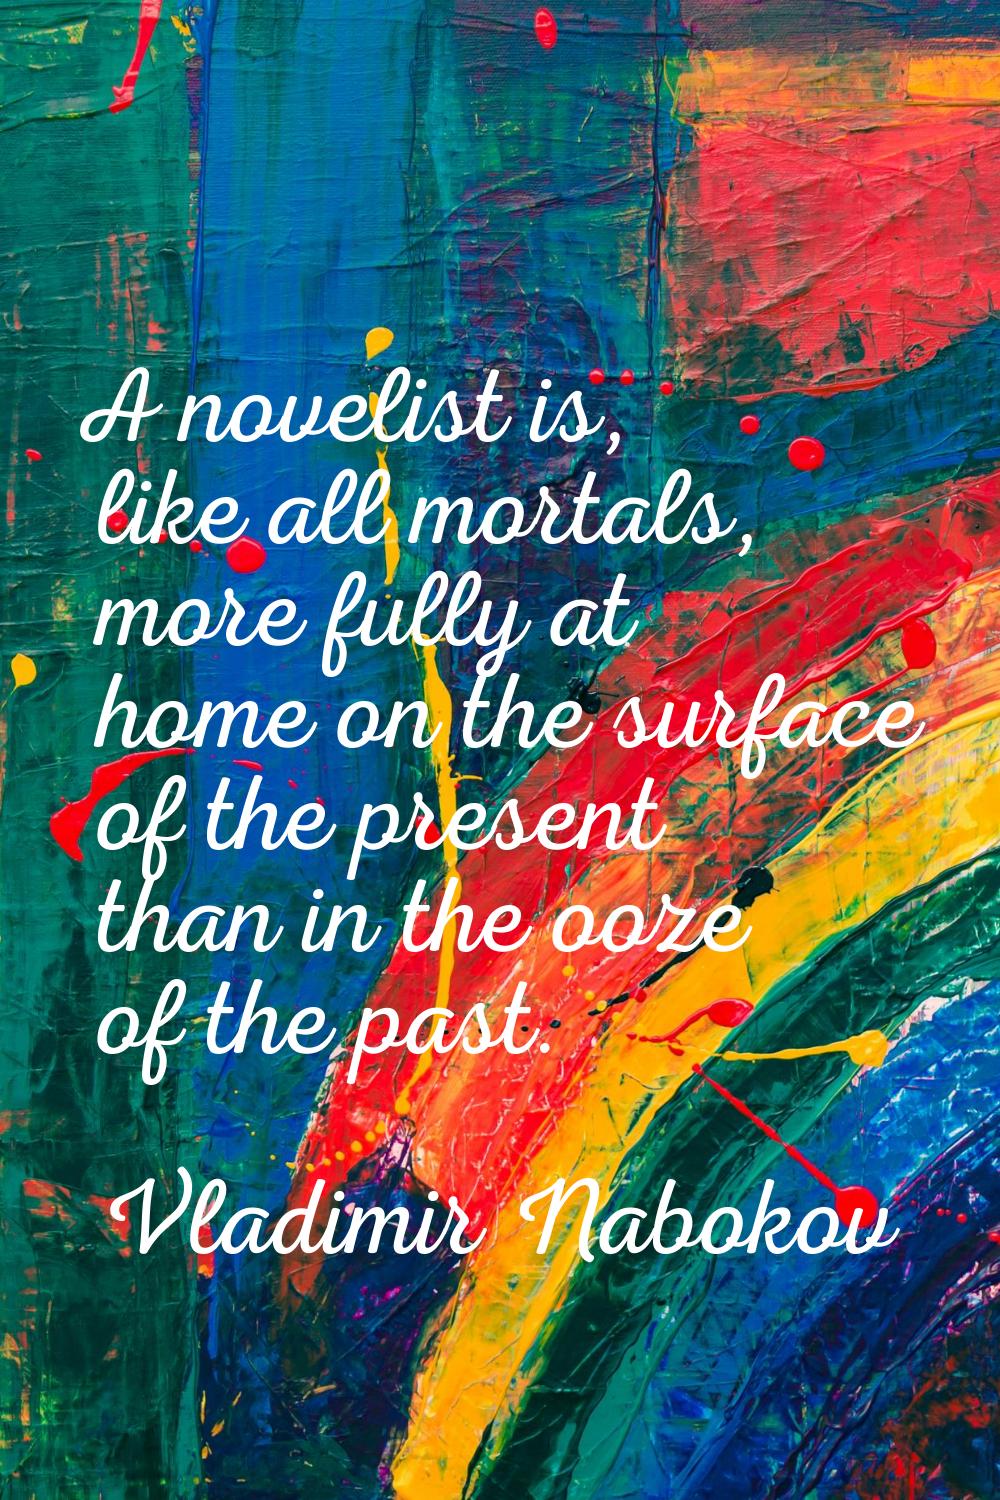 A novelist is, like all mortals, more fully at home on the surface of the present than in the ooze 